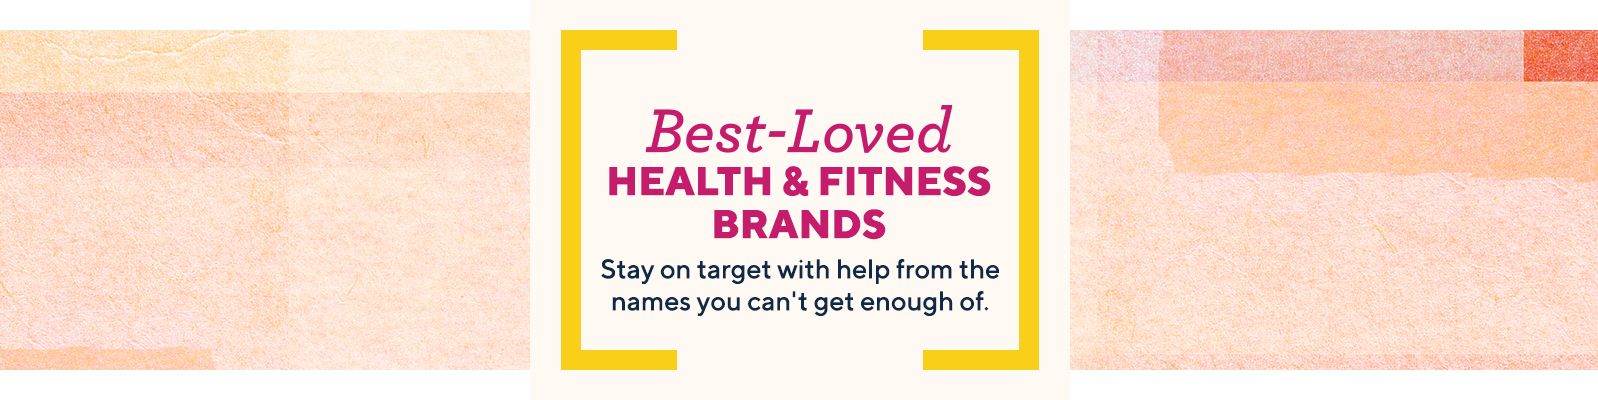 Best-Loved Health & Fitness Brands.  Stay on target with help from the names you can't get enough of.